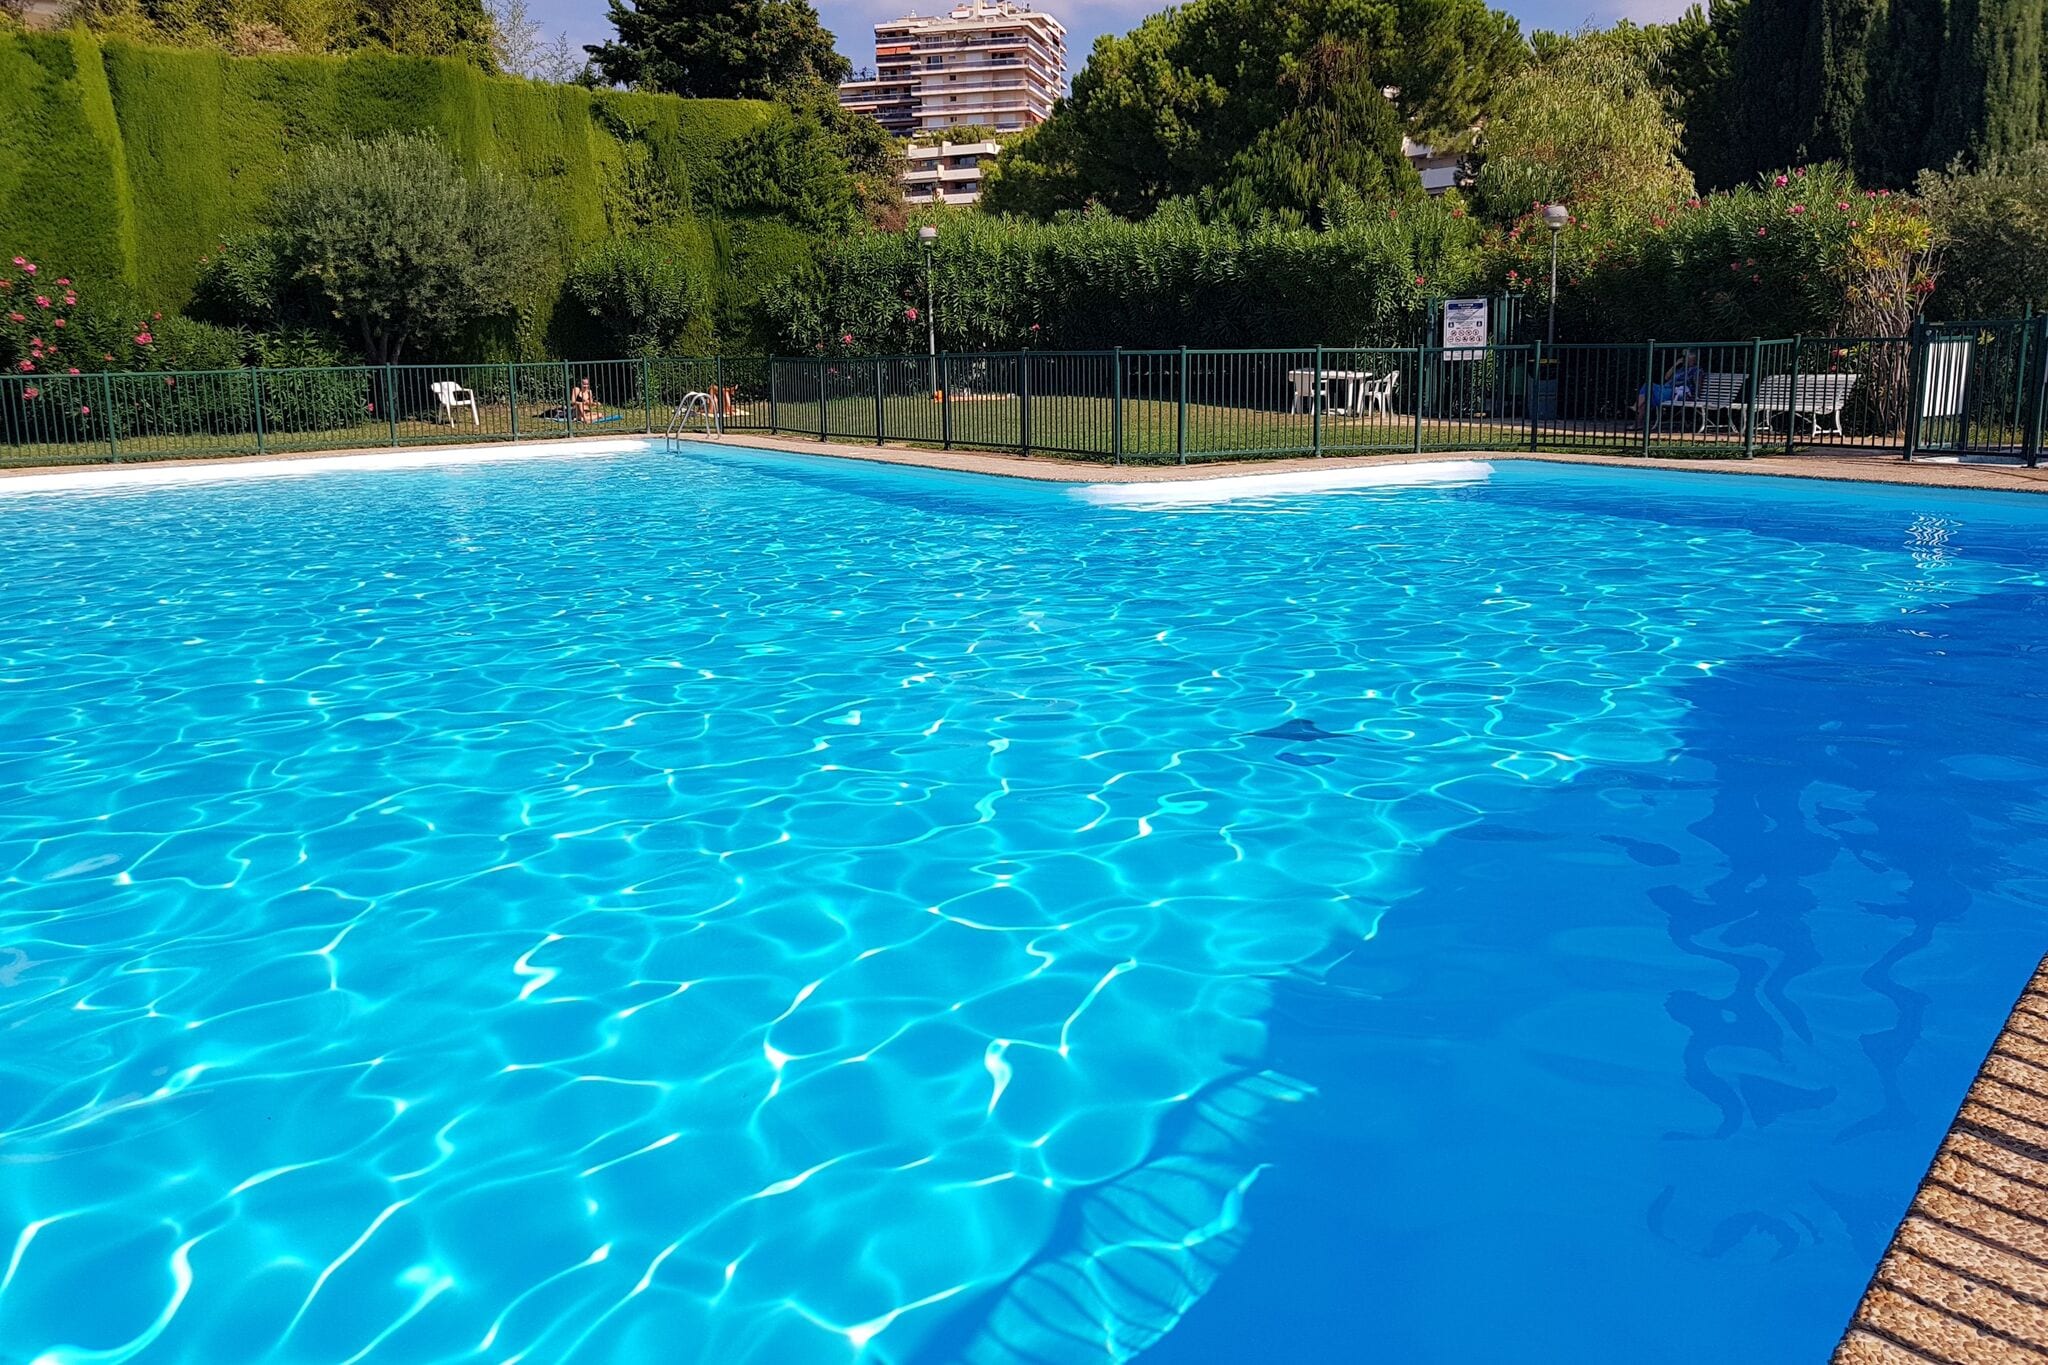 Classy Apartment in Nice with pool and private parking place